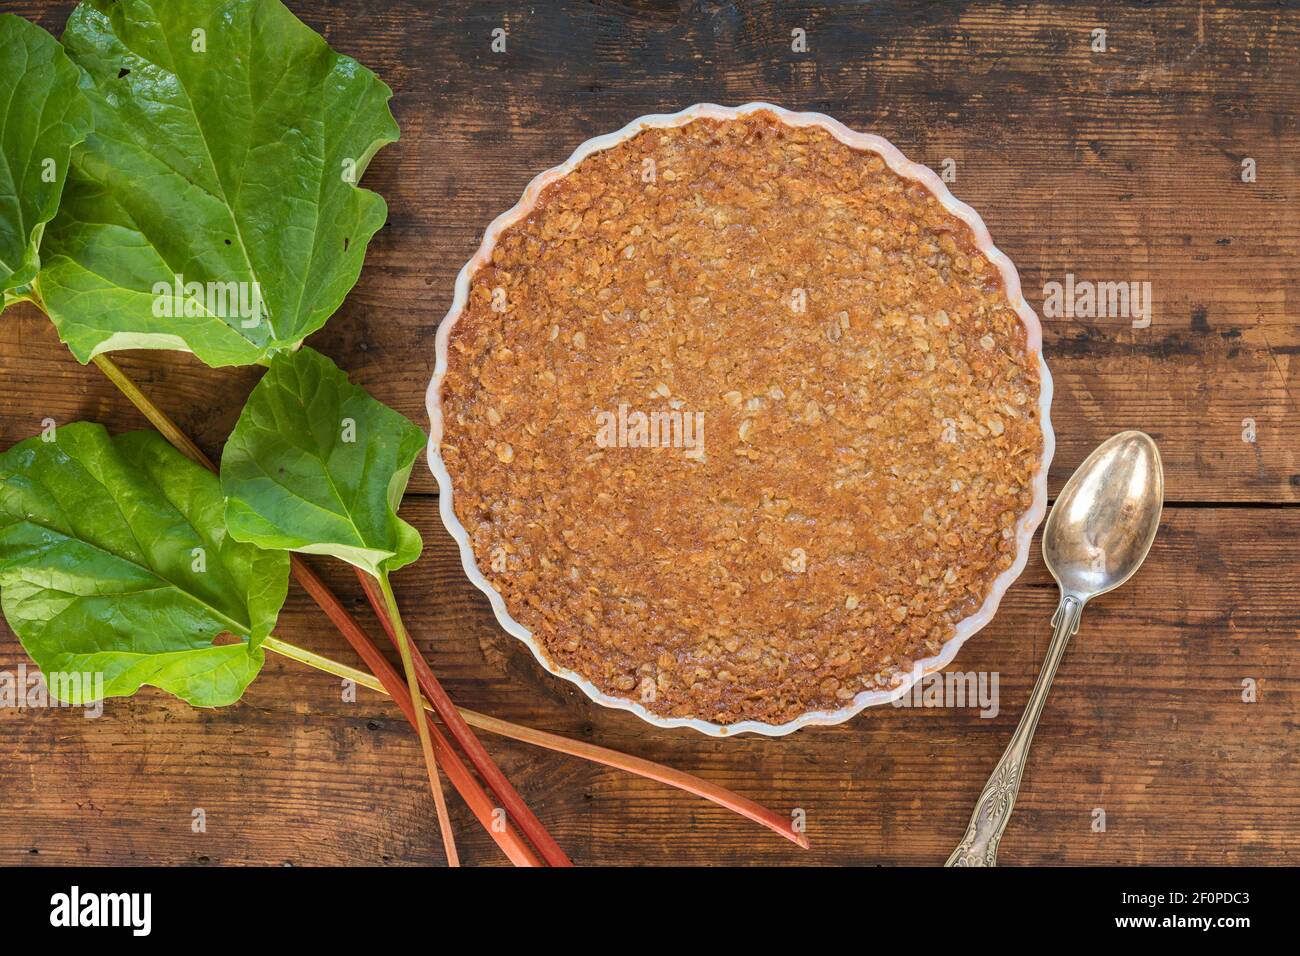 Traditional rhubarb pie on a rustic wooden table with a rhubarb stem. The pie is with a toffee topping made of rolled oats, cream, syrup, sugar, flour Stock Photo